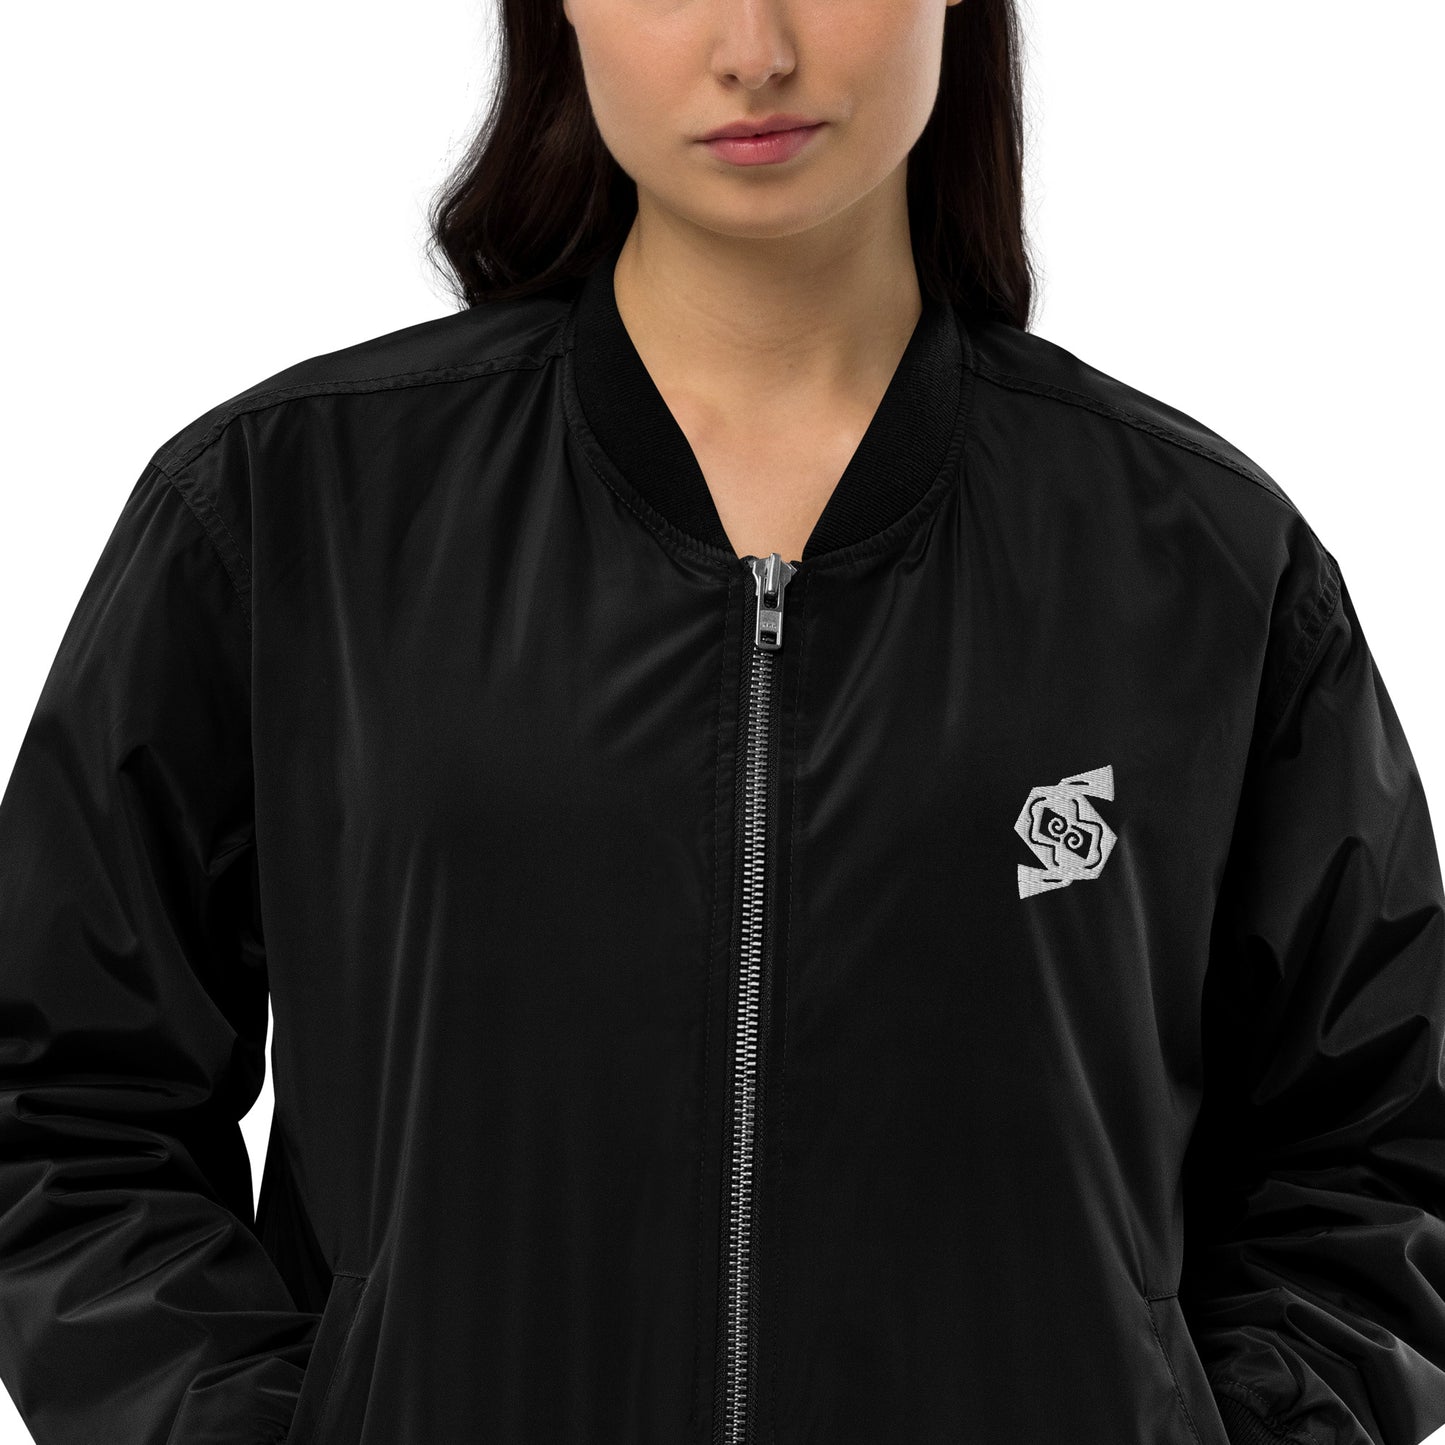 SANSE™ Brand recycled bomber jacket (Personalize me!)